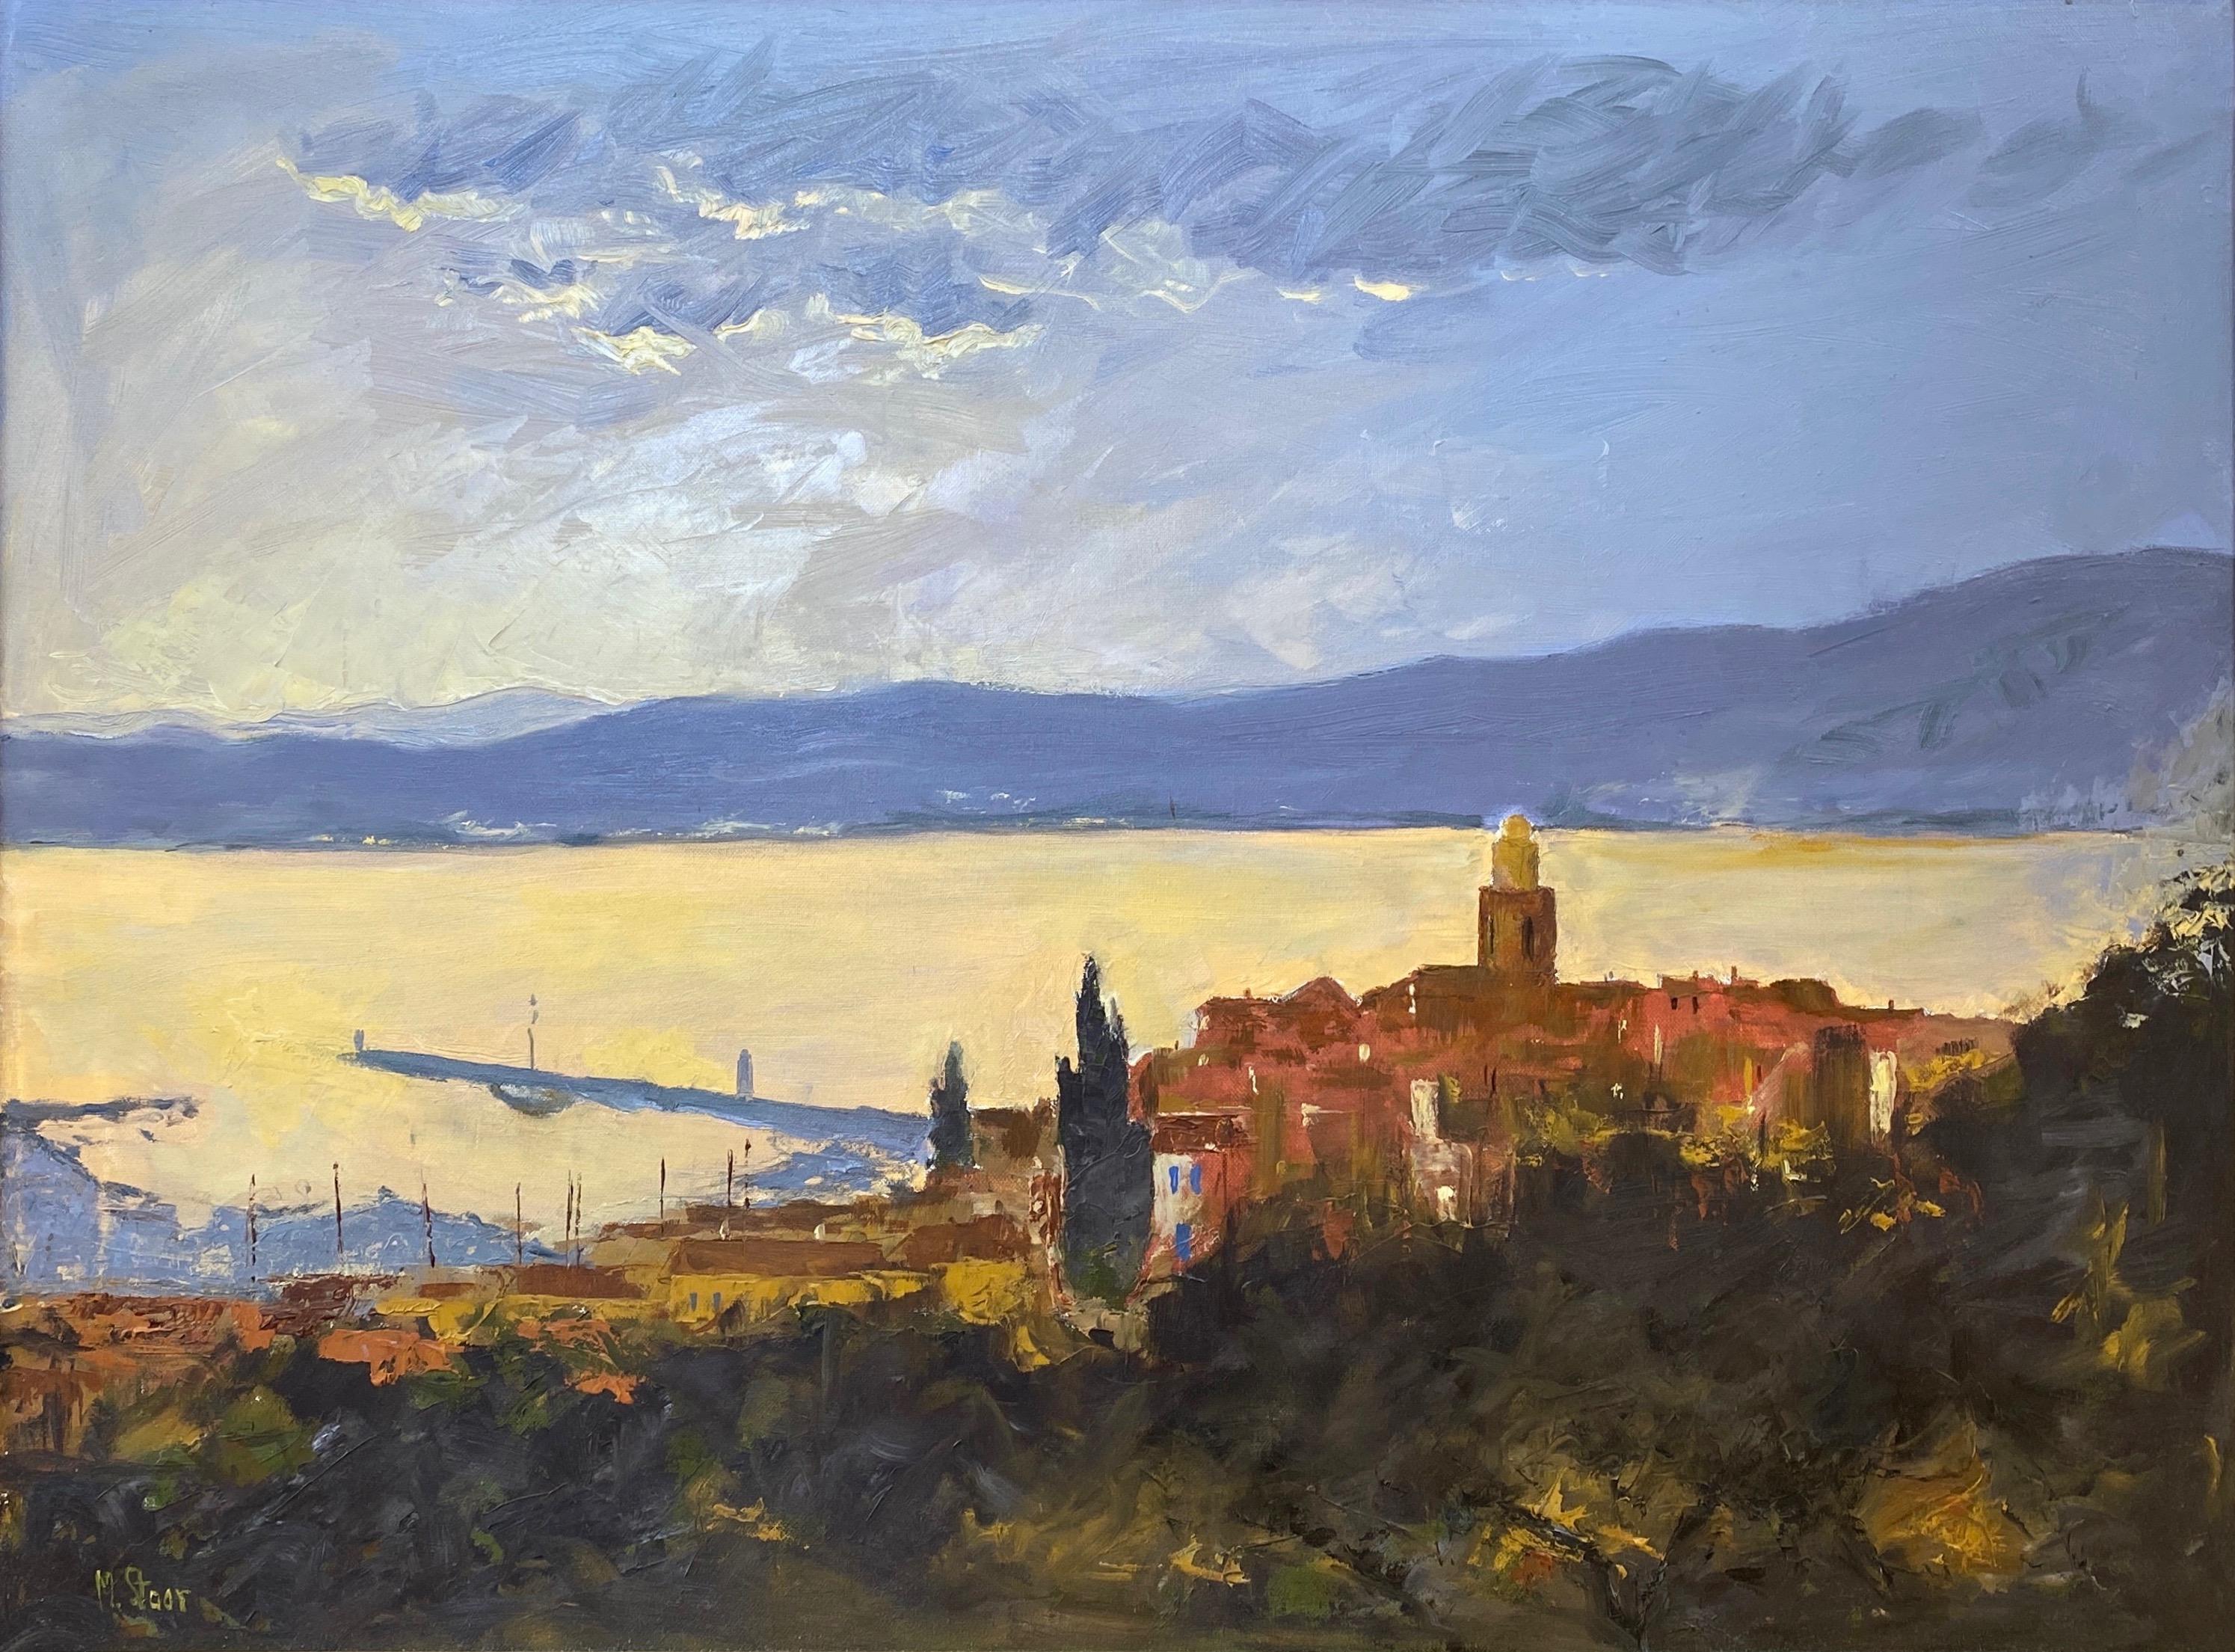 A lovely 1970s untitled impressionist oil painting on canvas of Saint-Tropez, France, as seen from the town’s historic Citadel, a hilltop fortress built in 1602 that affords one panoramic views of the bay. Signed “M. Staar” or 